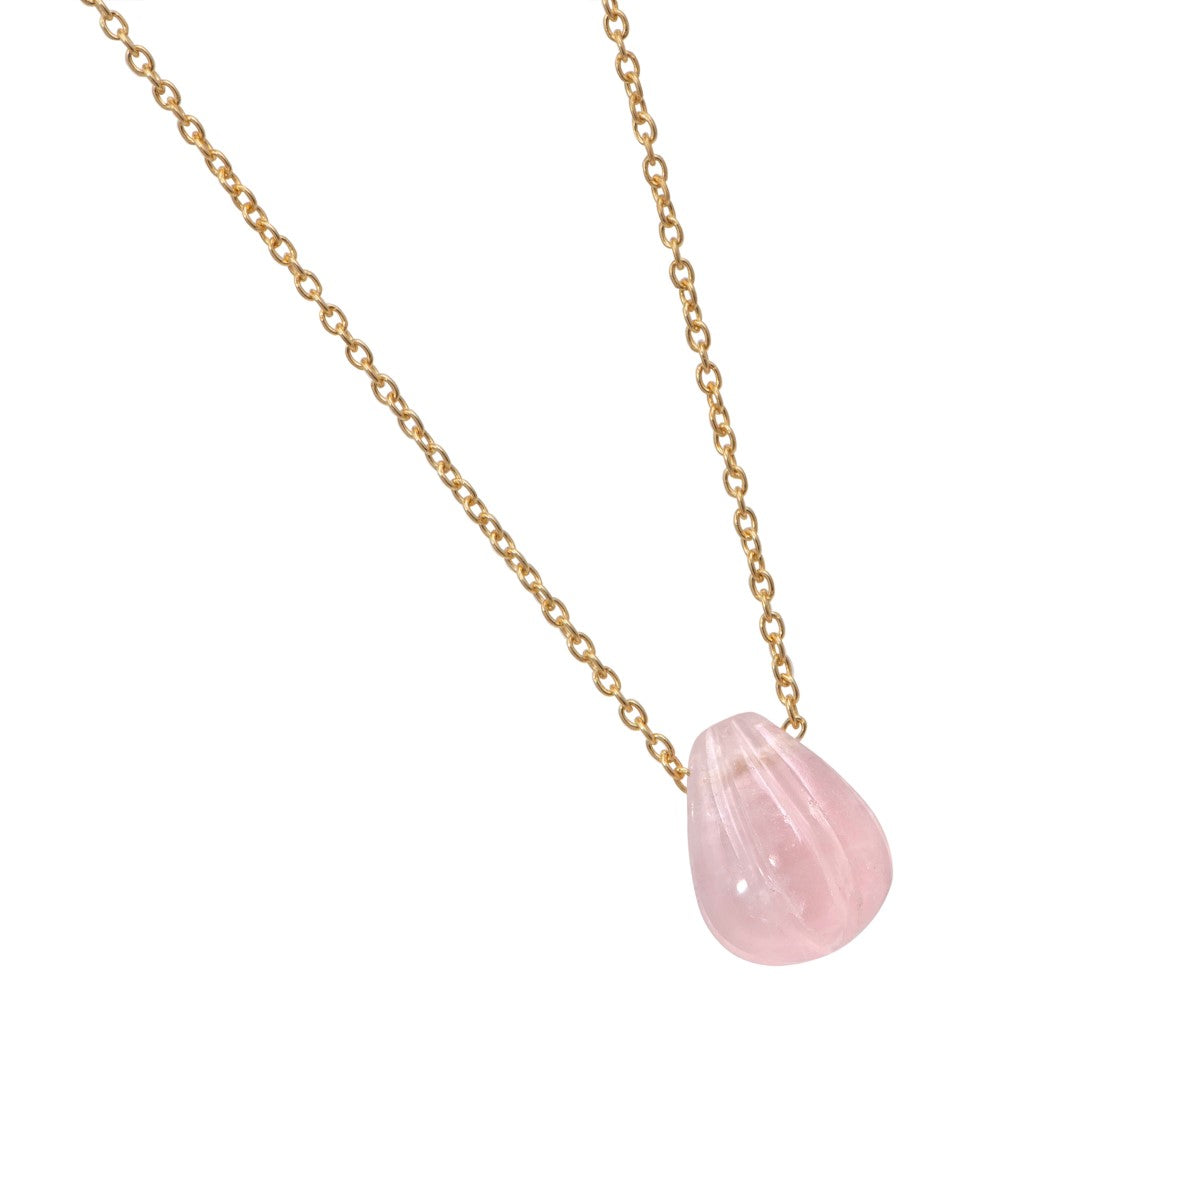 Gold Plated Sterling Silver Necklace with a Carved Rose Quartz Gemstone